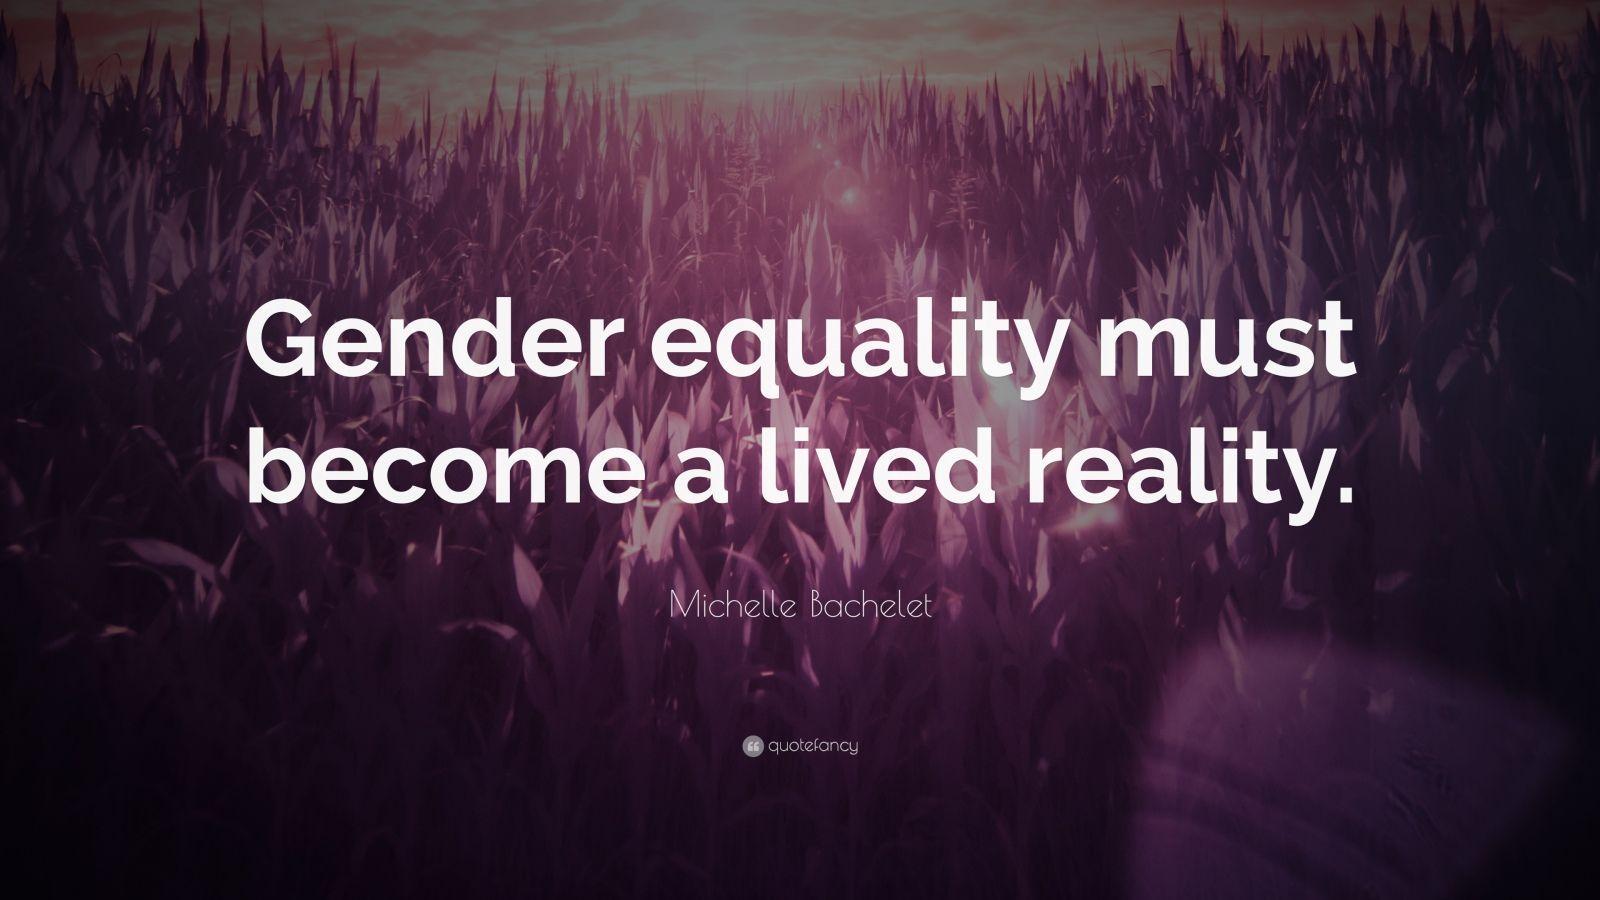 Michelle Bachelet Quote: “Gender equality must become a lived